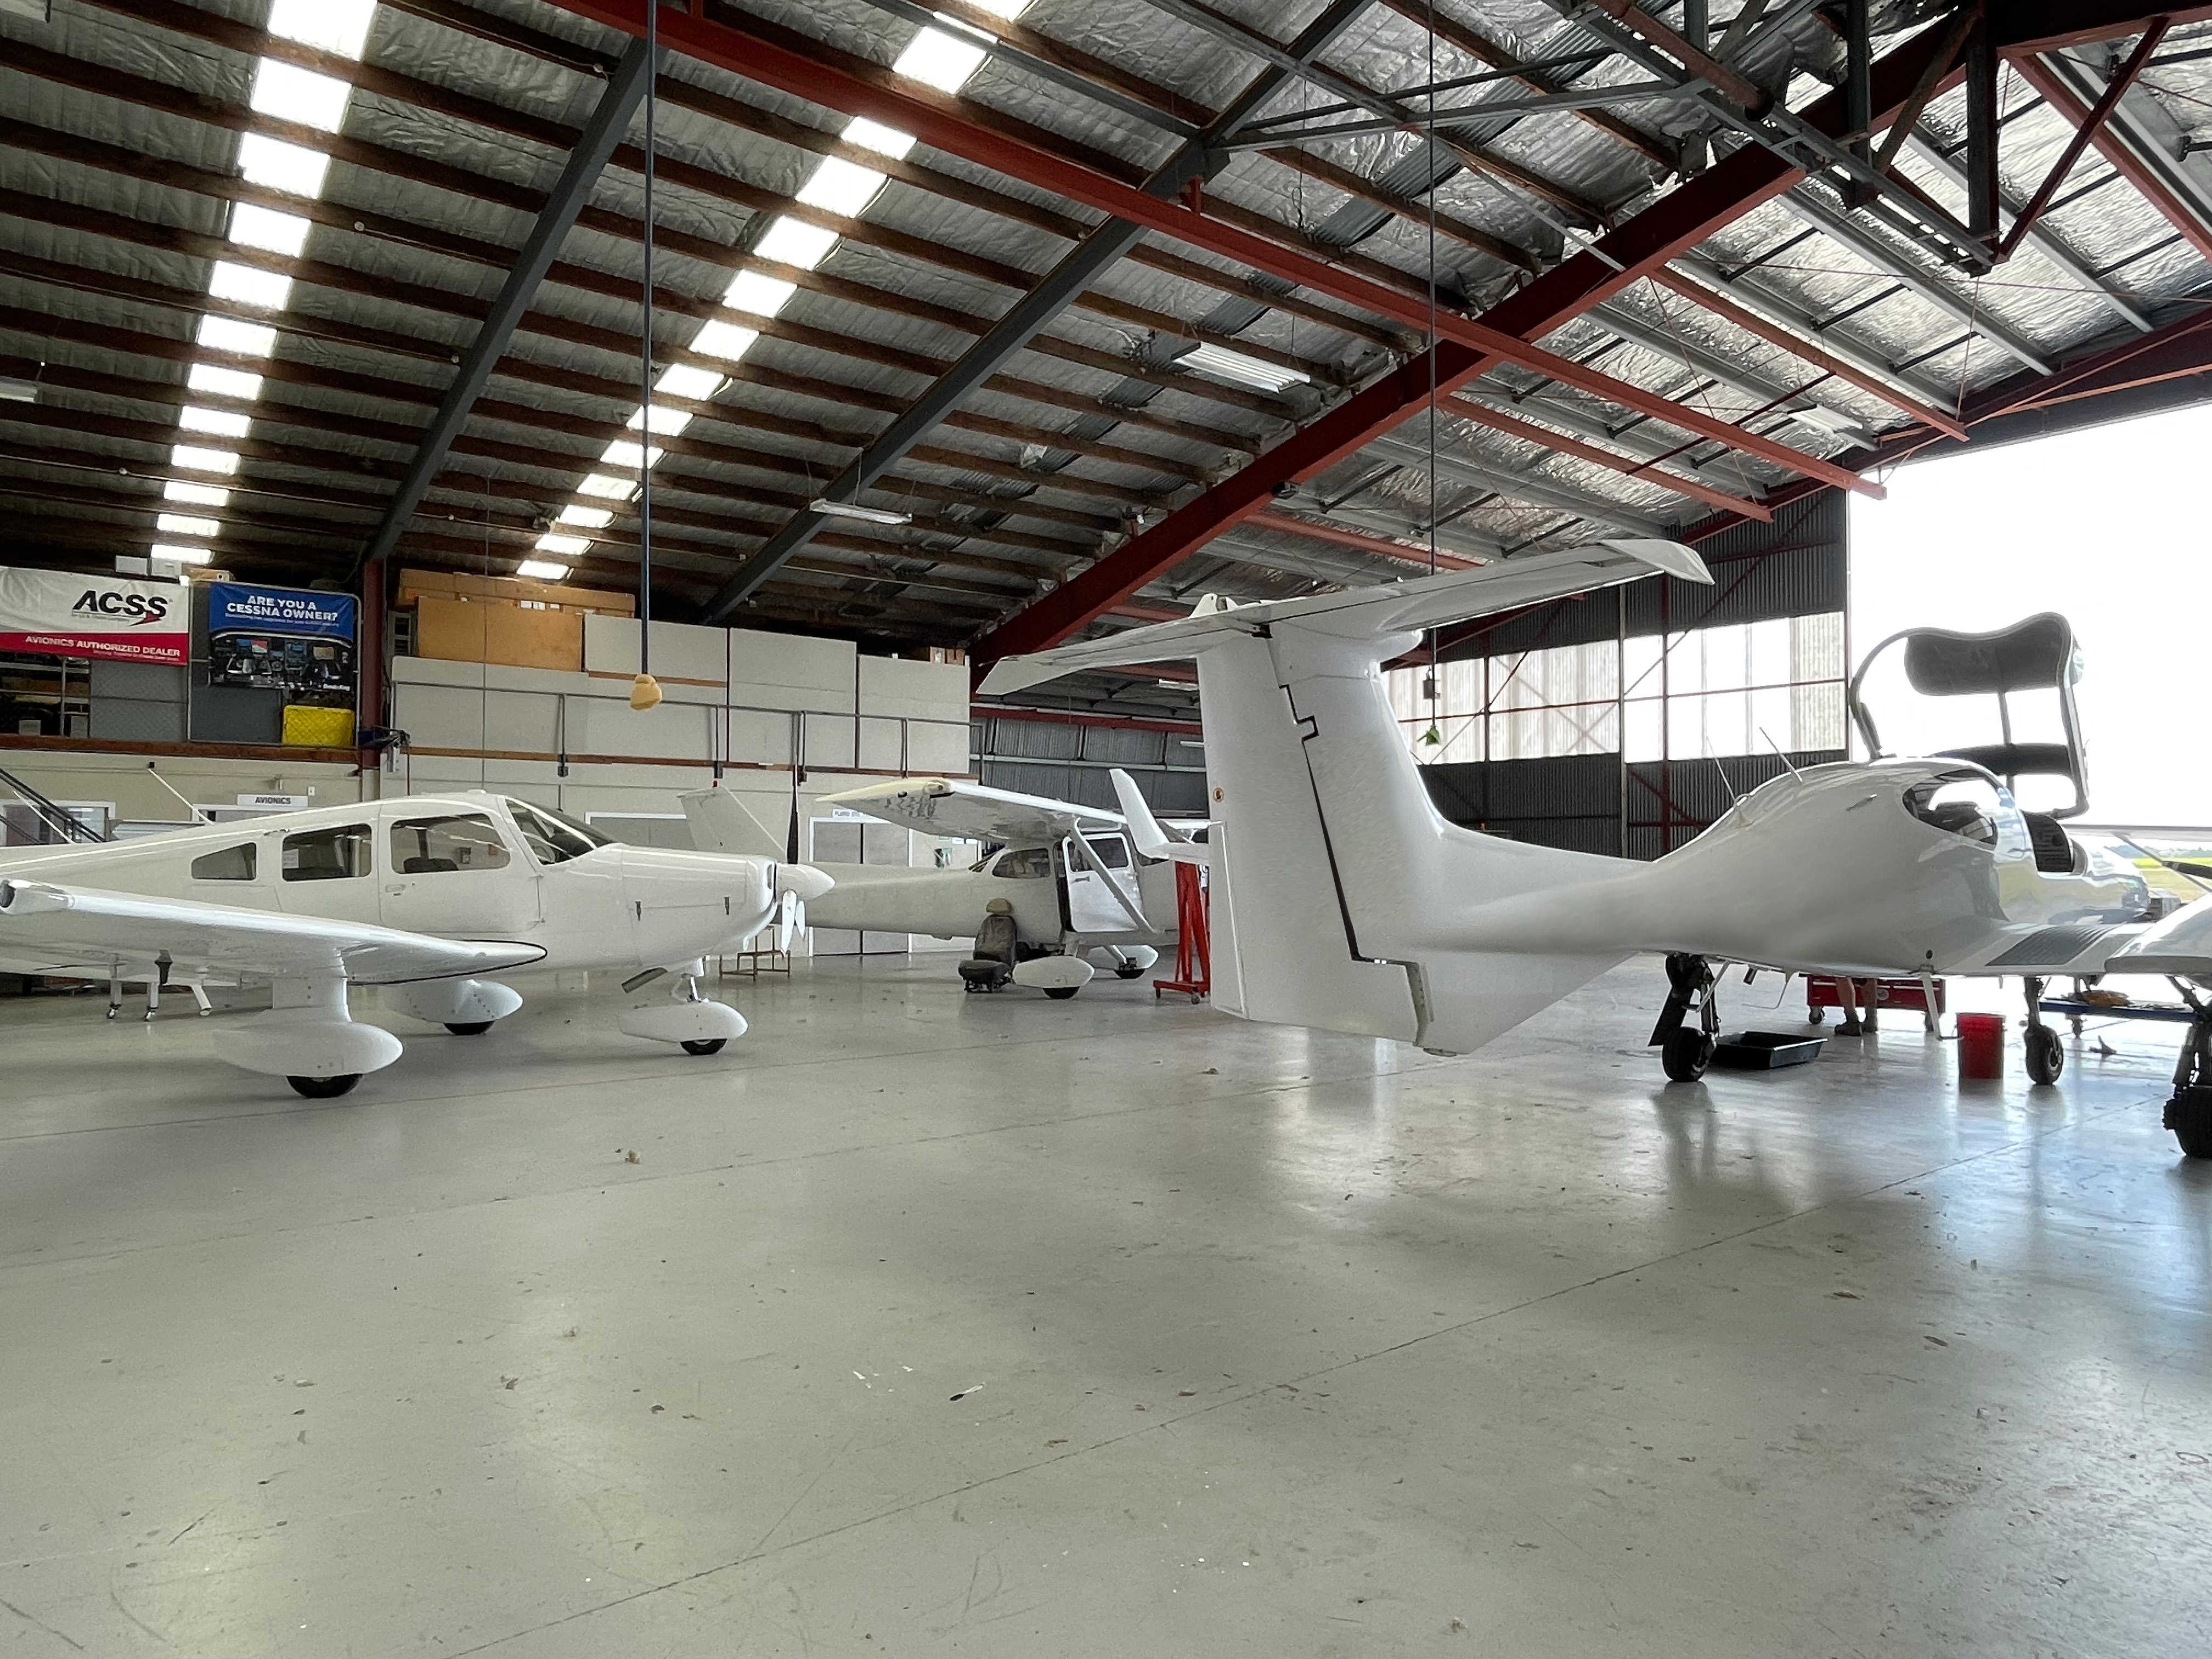 Fixed Wing aircraft in hangar